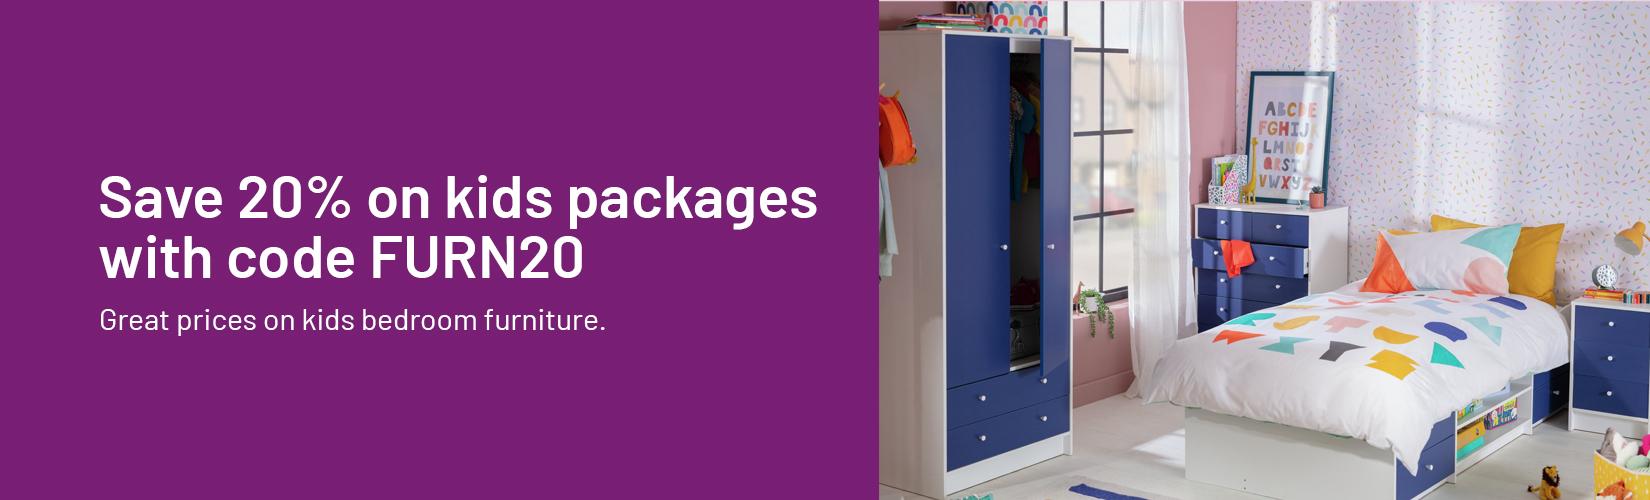 Save 20% on kids packages with code FURN 20.